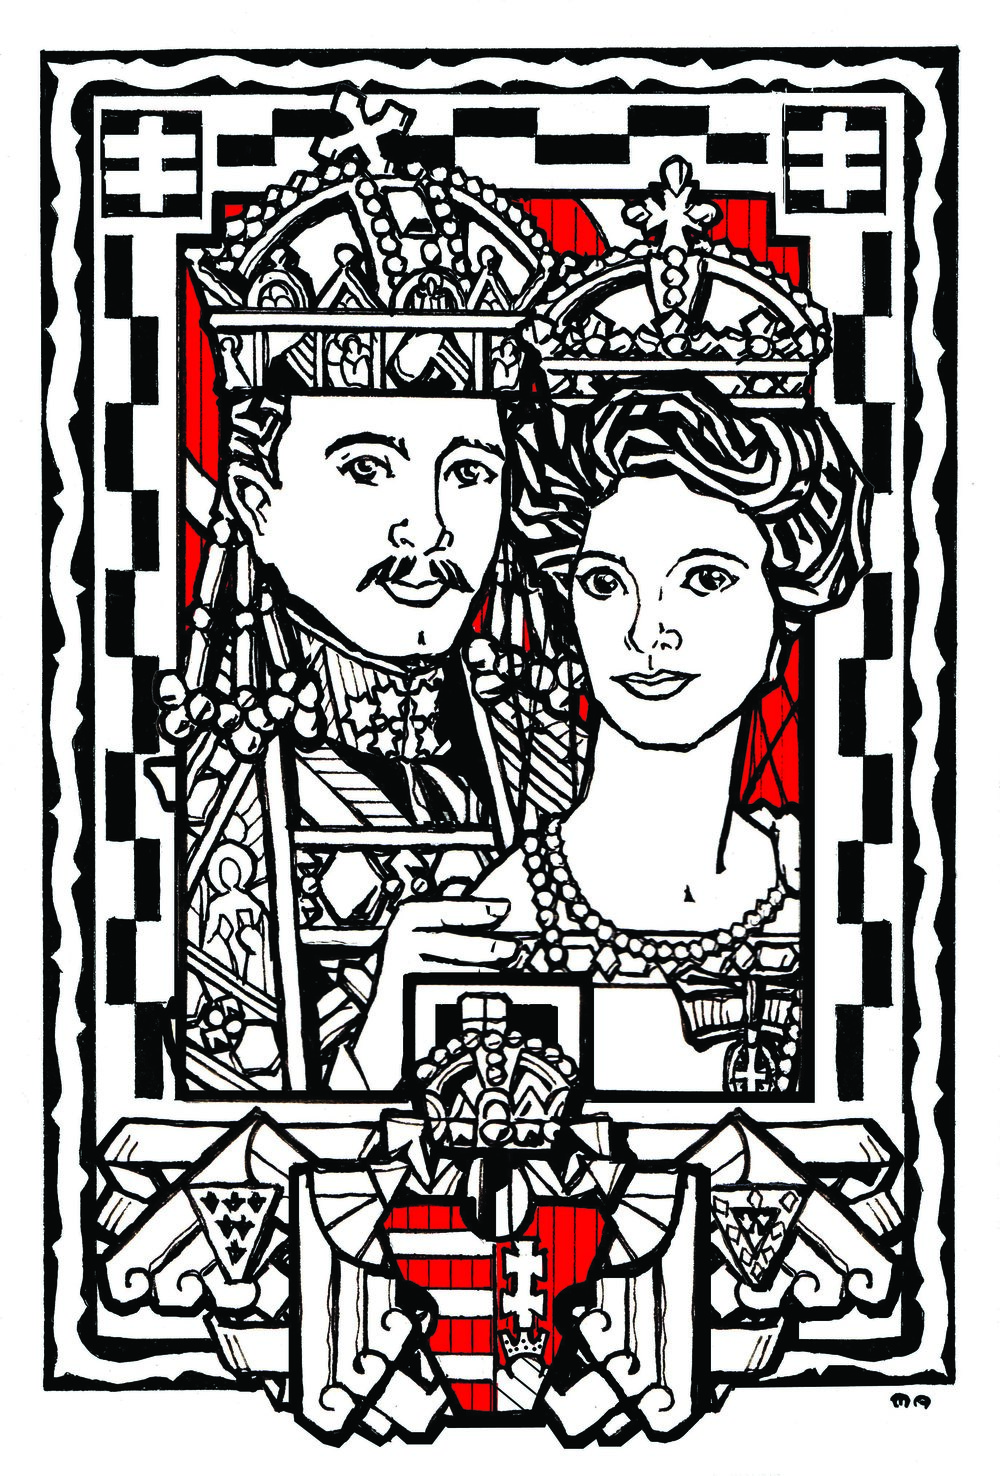 Apostolic King and Queen of Hungary